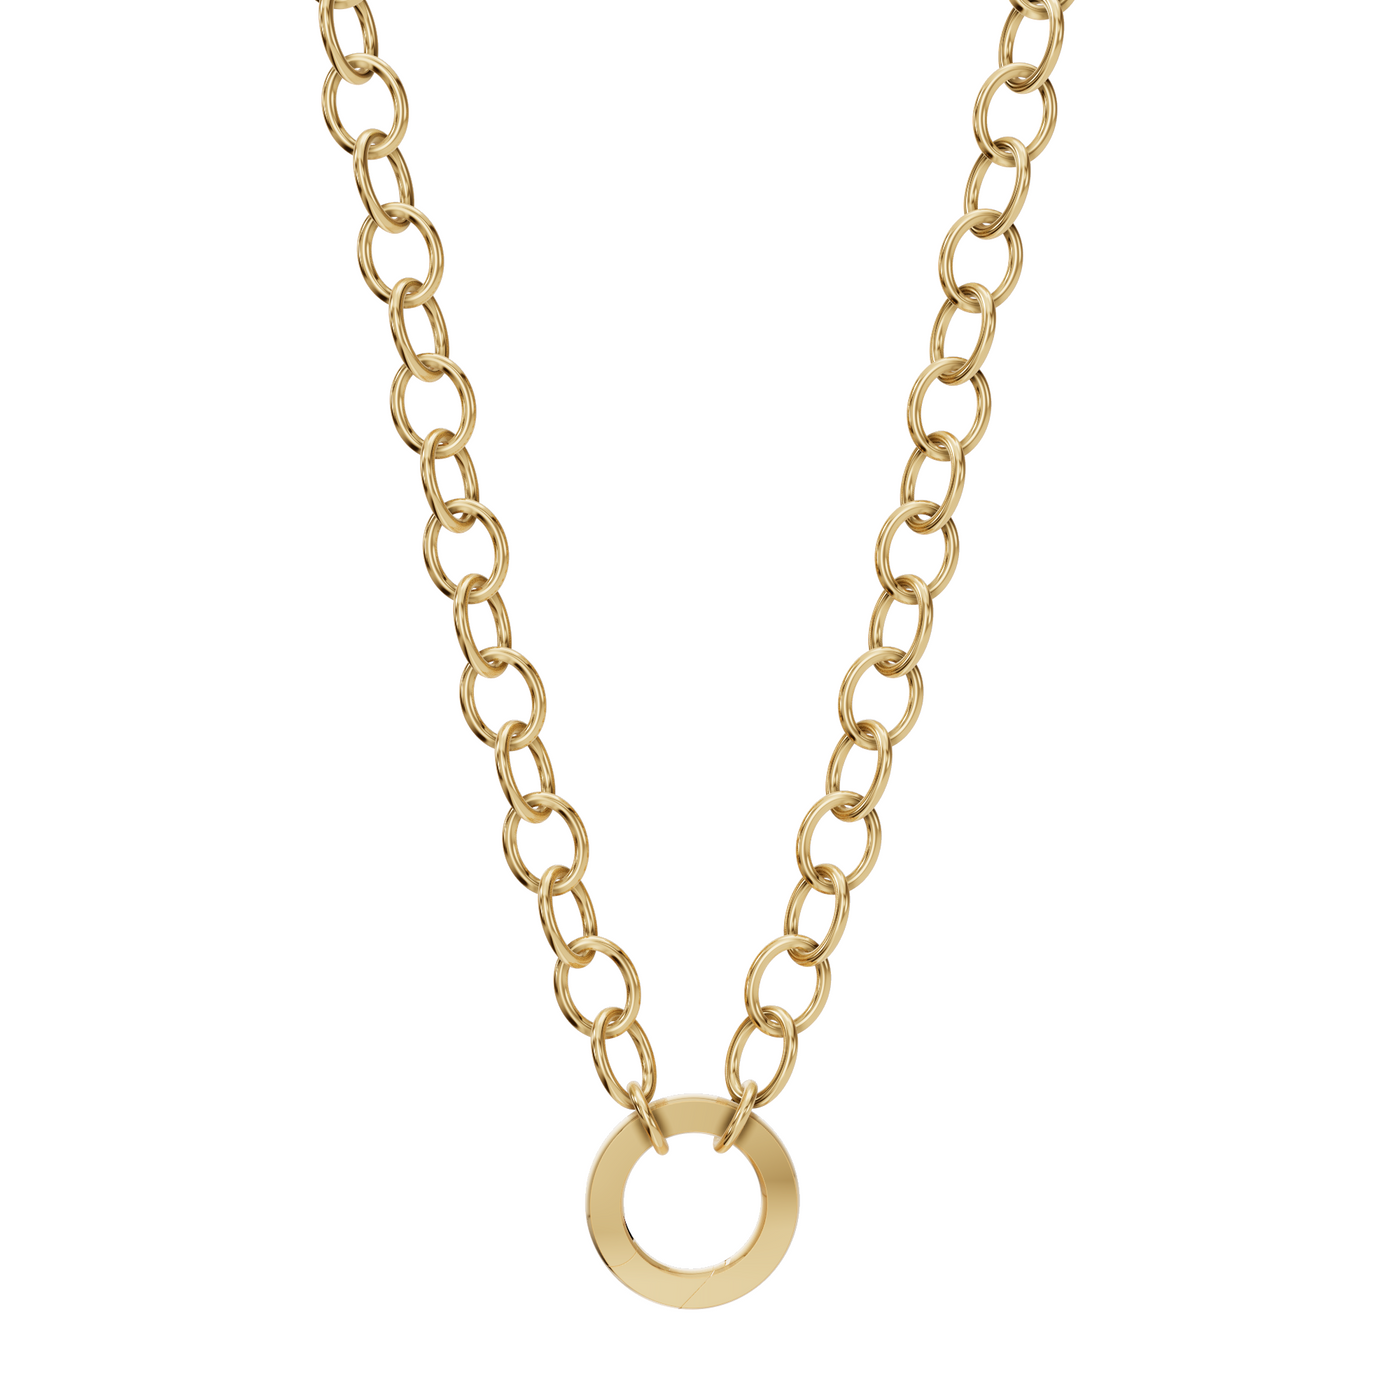 4.8mm Solid 14k Gold Hinge Chain